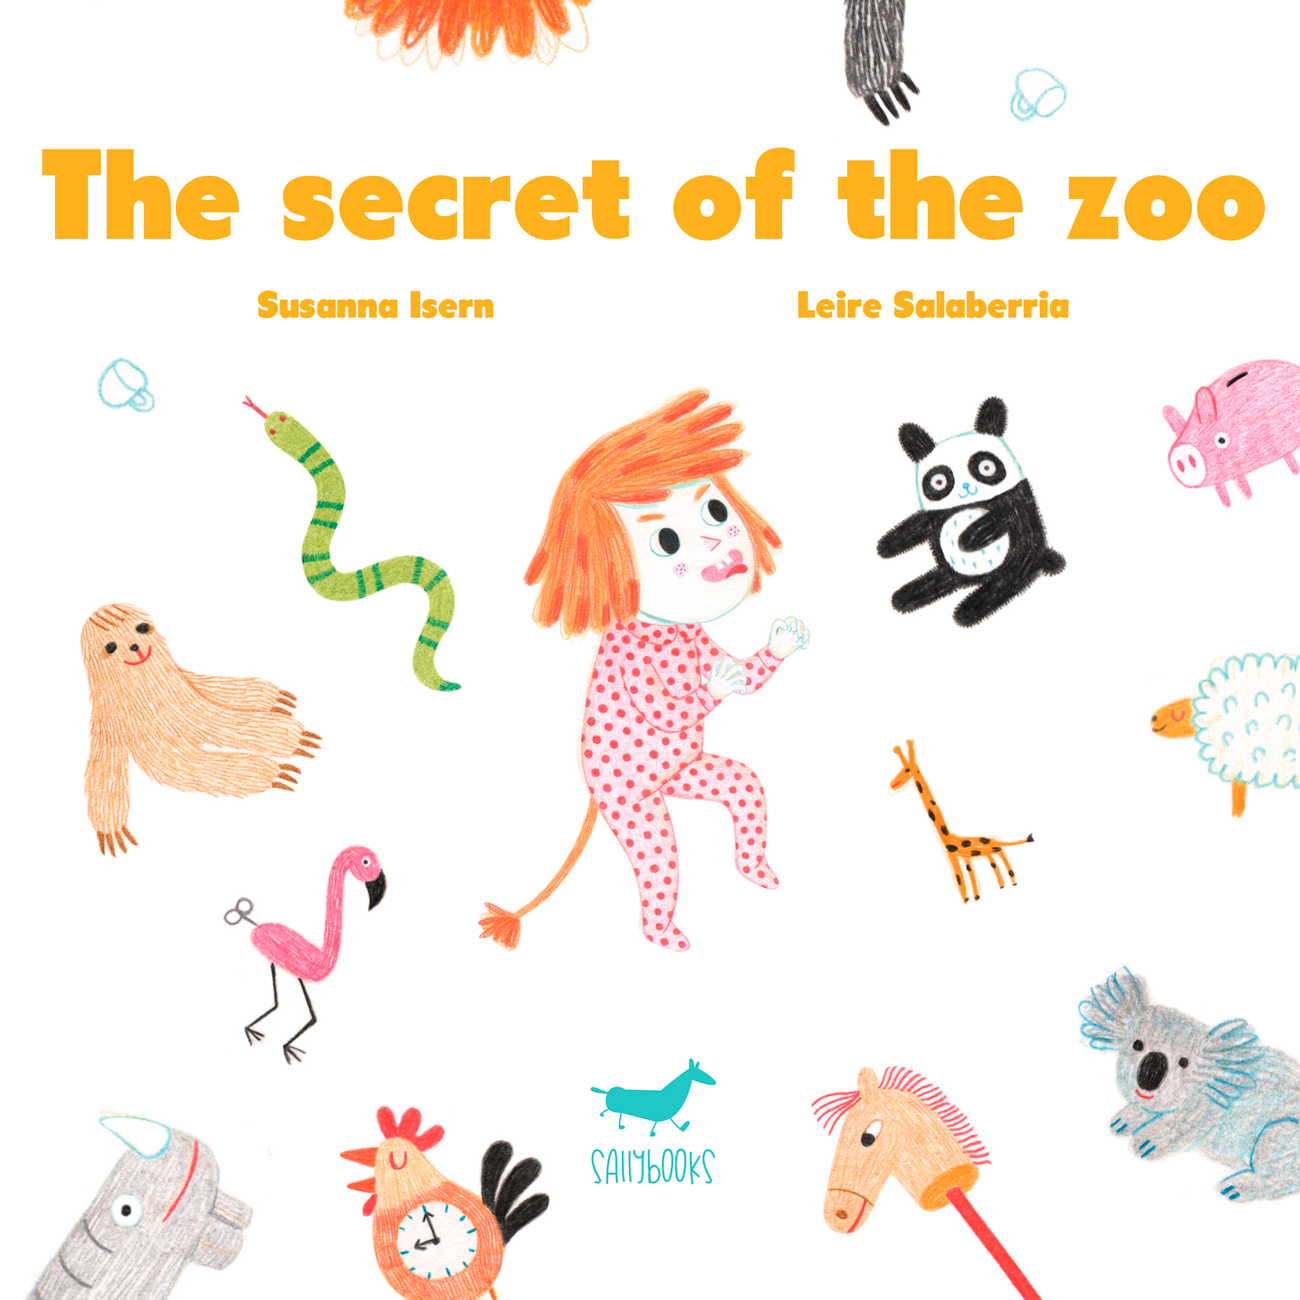 THE SECRET OF THE ZOO